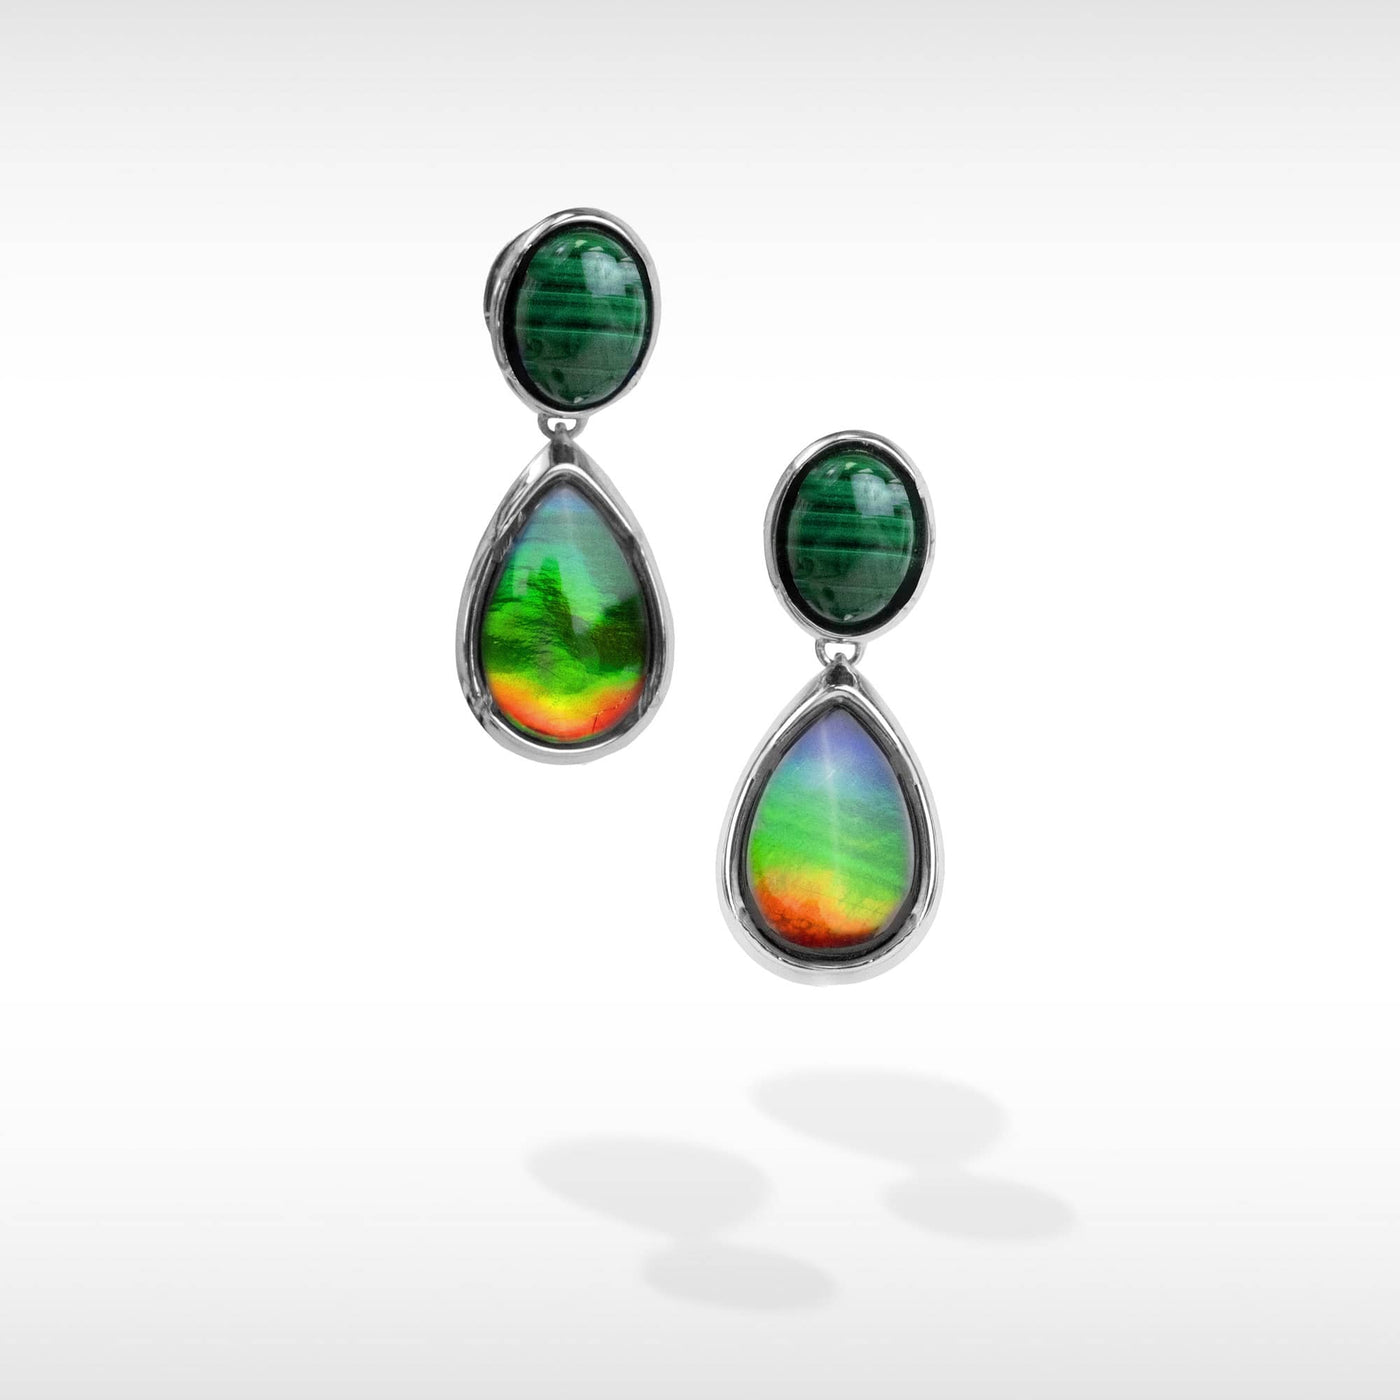 Harmony Ammolite Earrings in Sterling Silver with Malachite